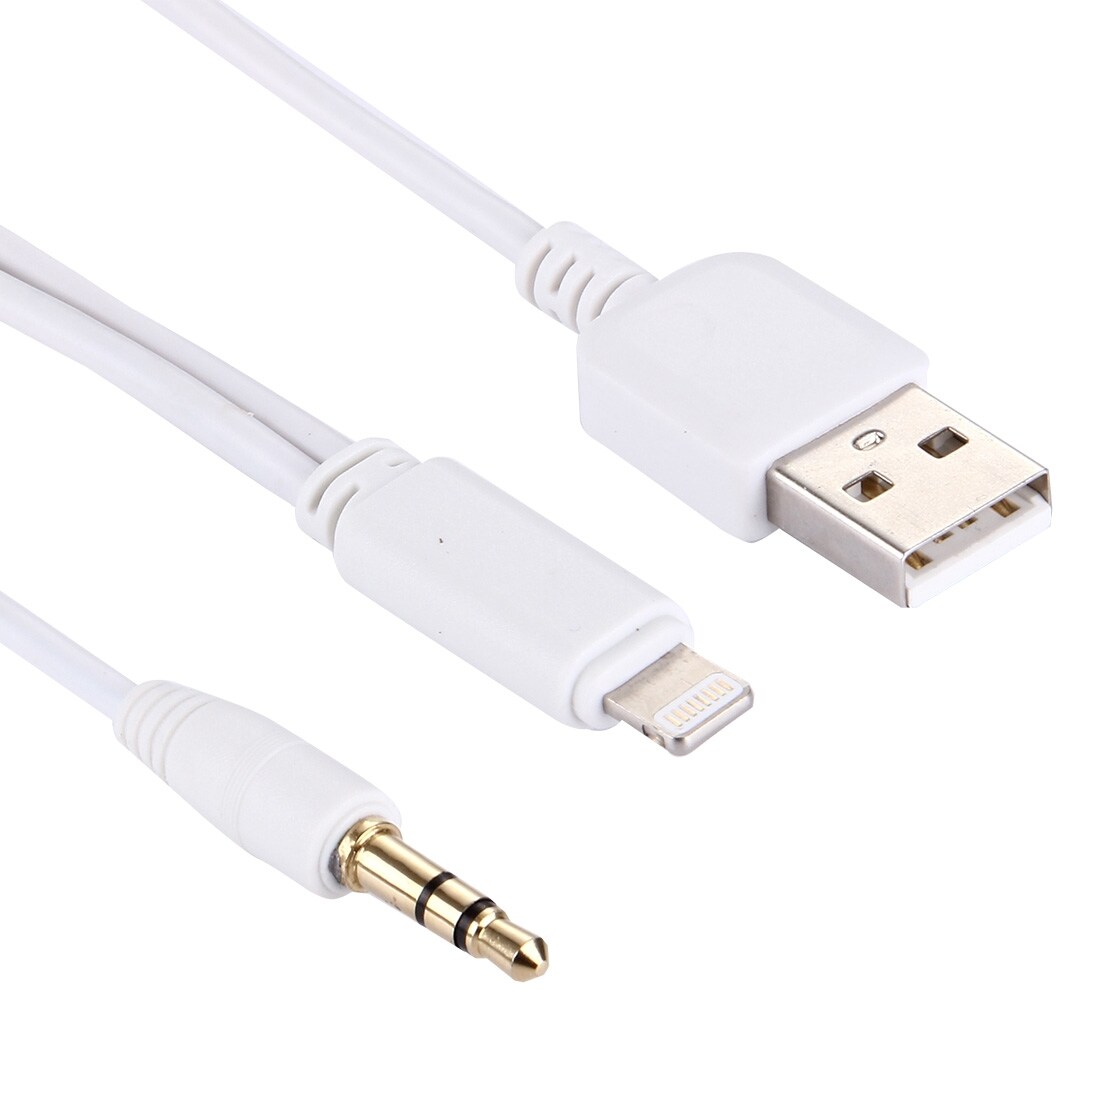 Ligthning & 3.5mm til USB lydadapter iPhone 8 / 7 / iPhone 8 / 7 Plus / iPhone